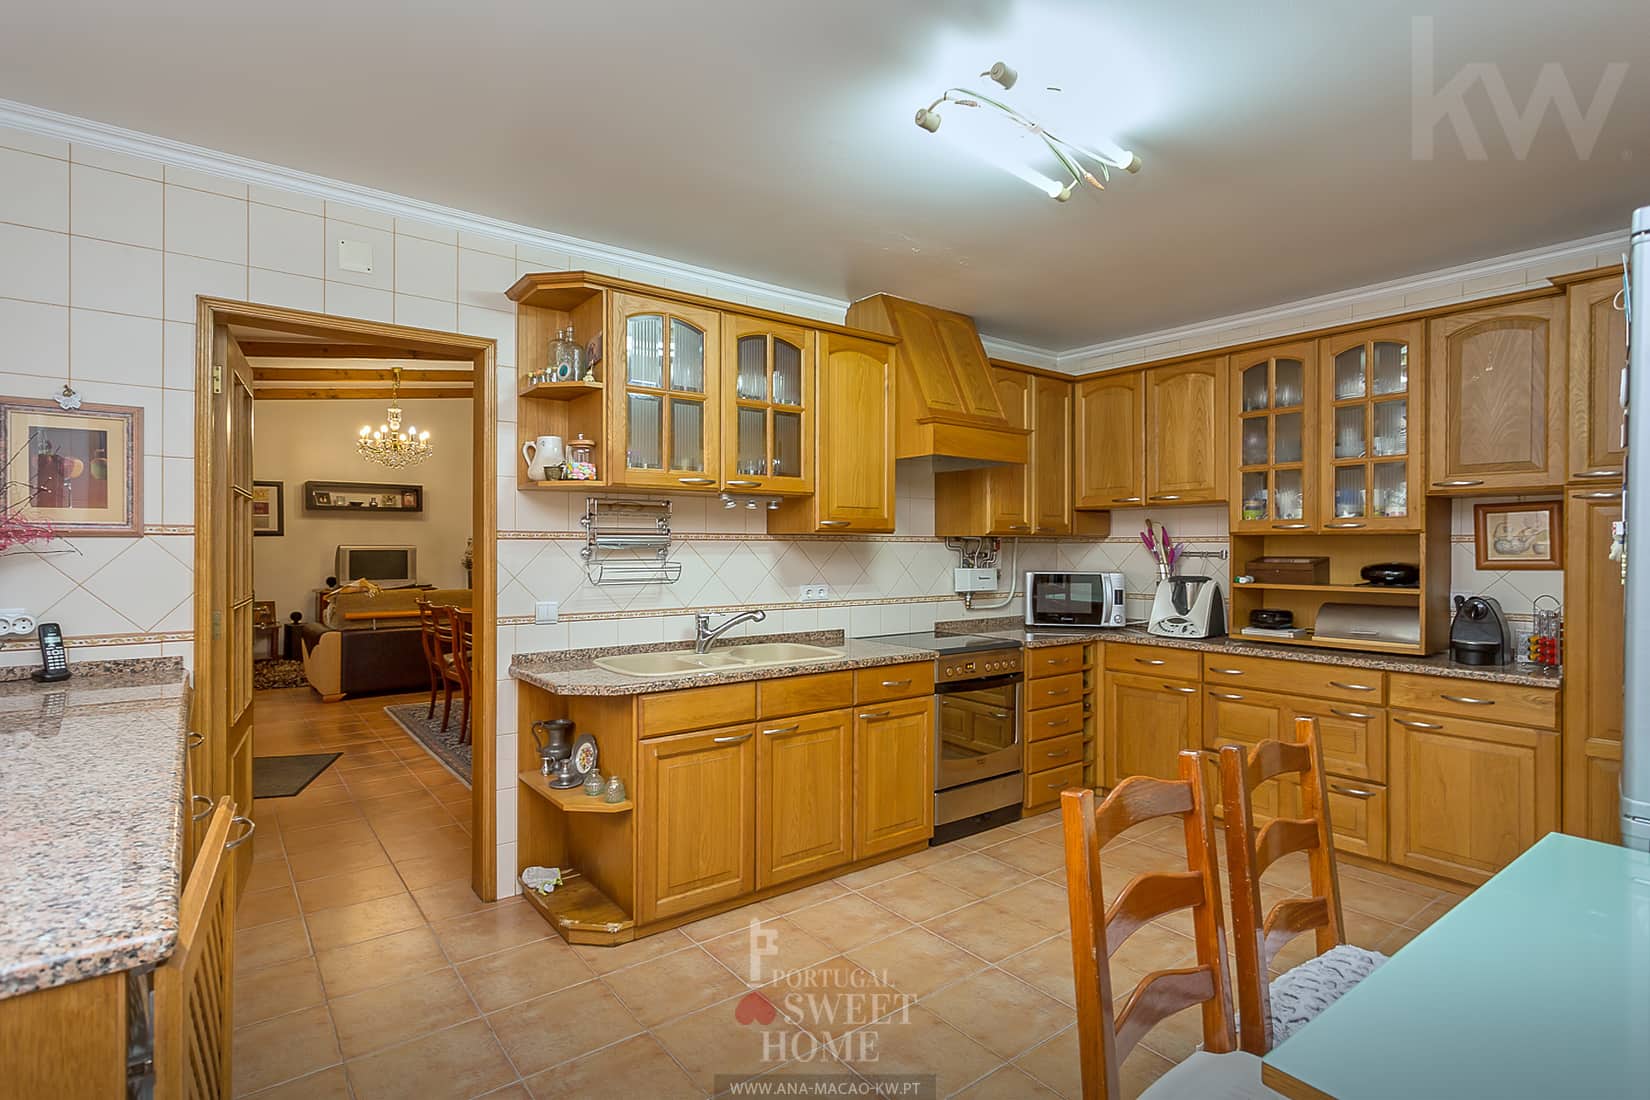 Fully equipped kitchen (17 m2)